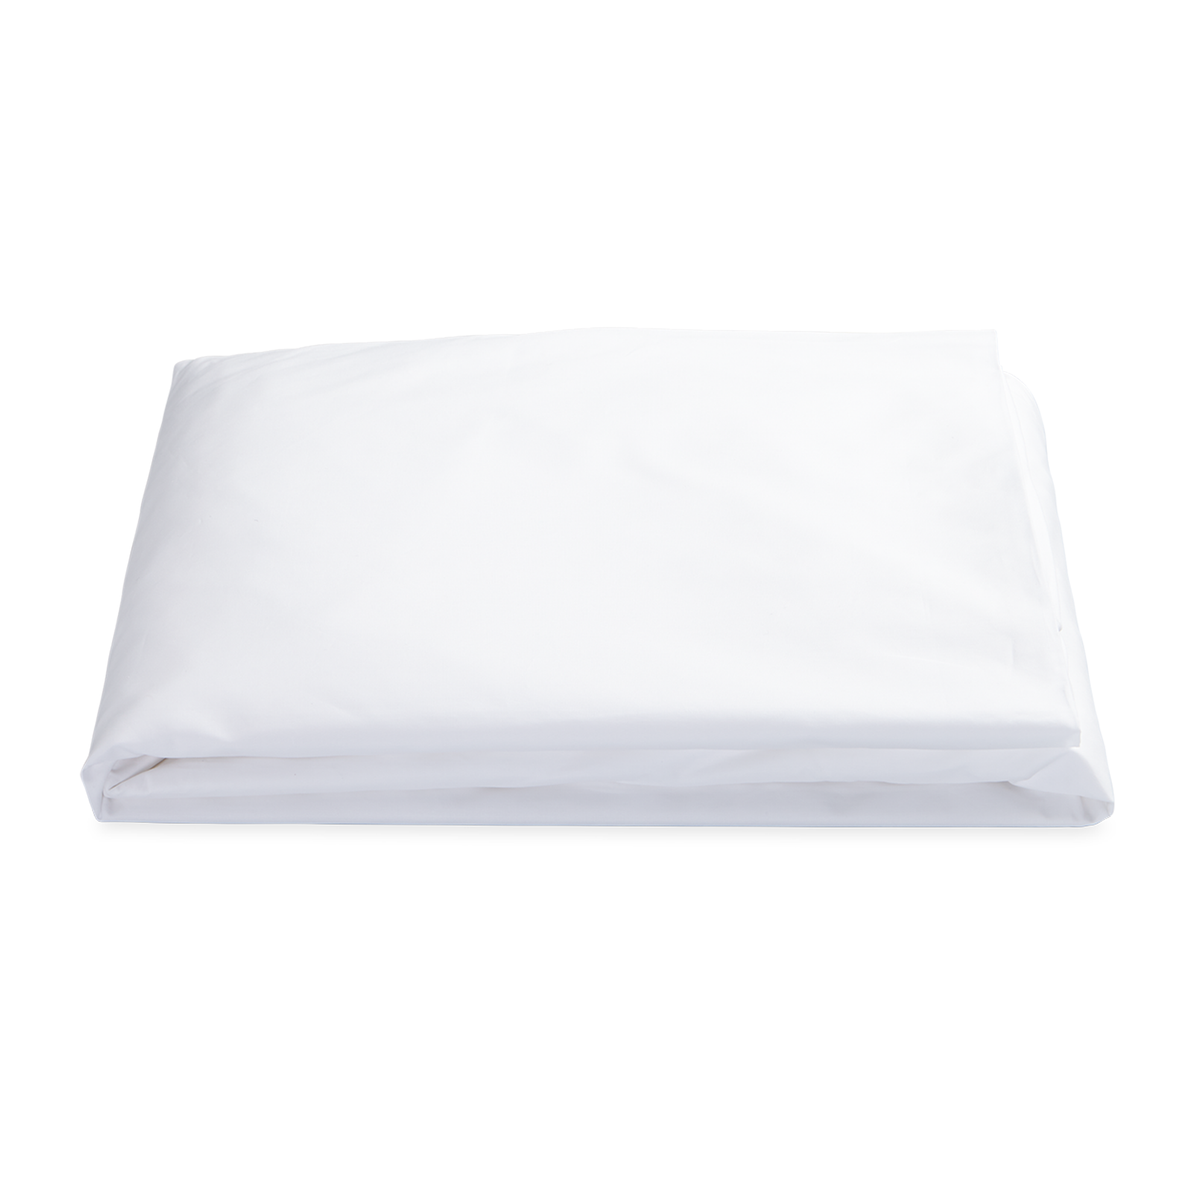 Folded Fitted Sheet of Matouk Gatsby Bedding in White Color